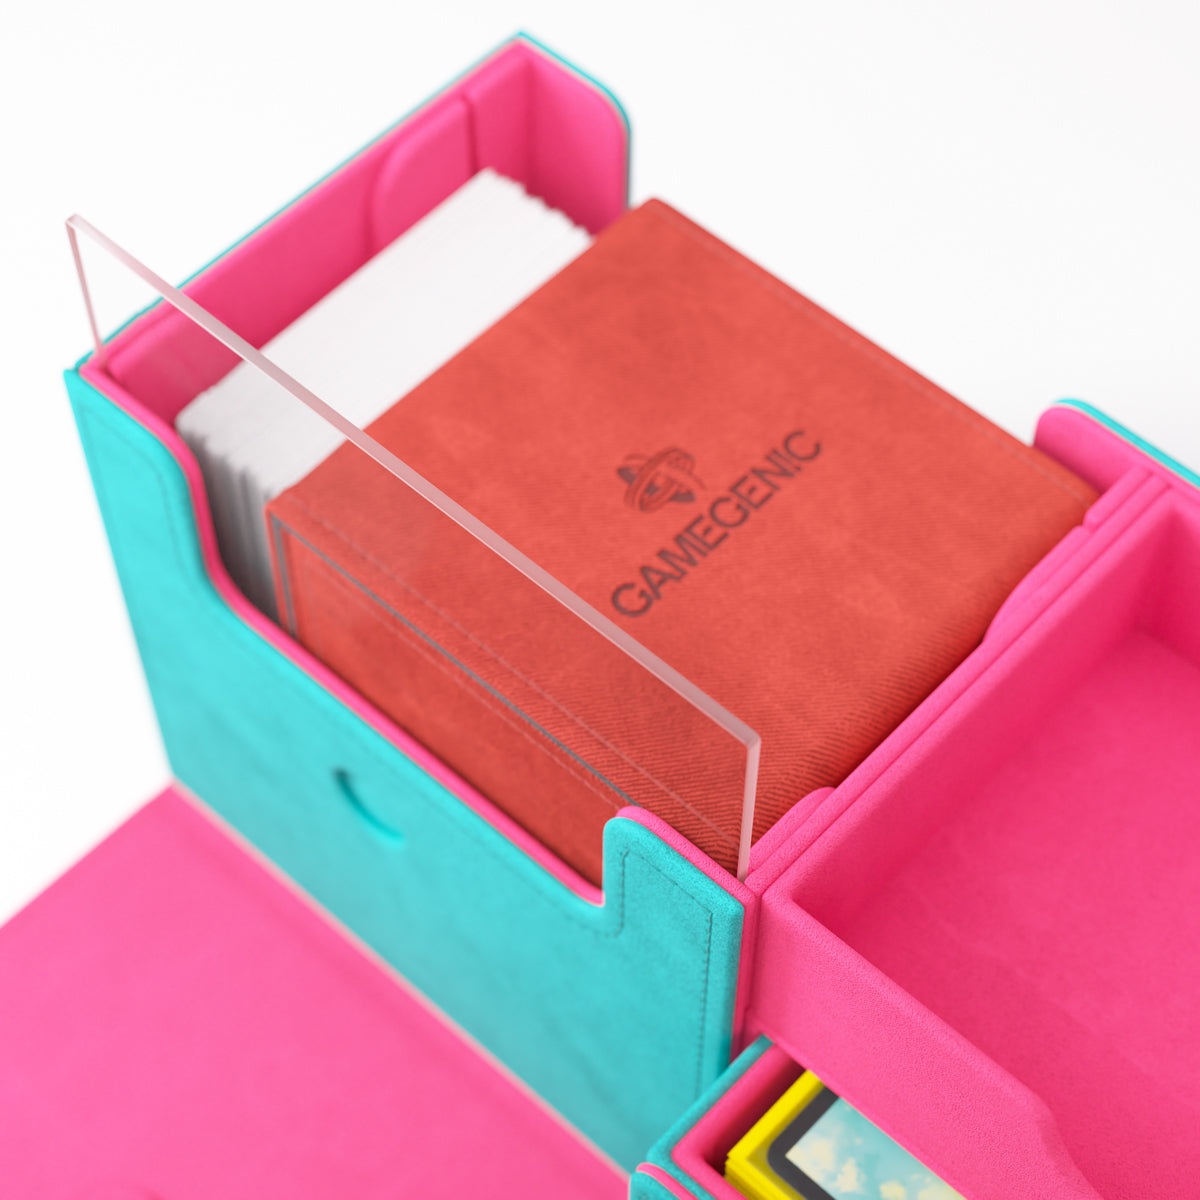 The Academic 133+ XL Convertible Teal/Pink Deck Box (133ct)